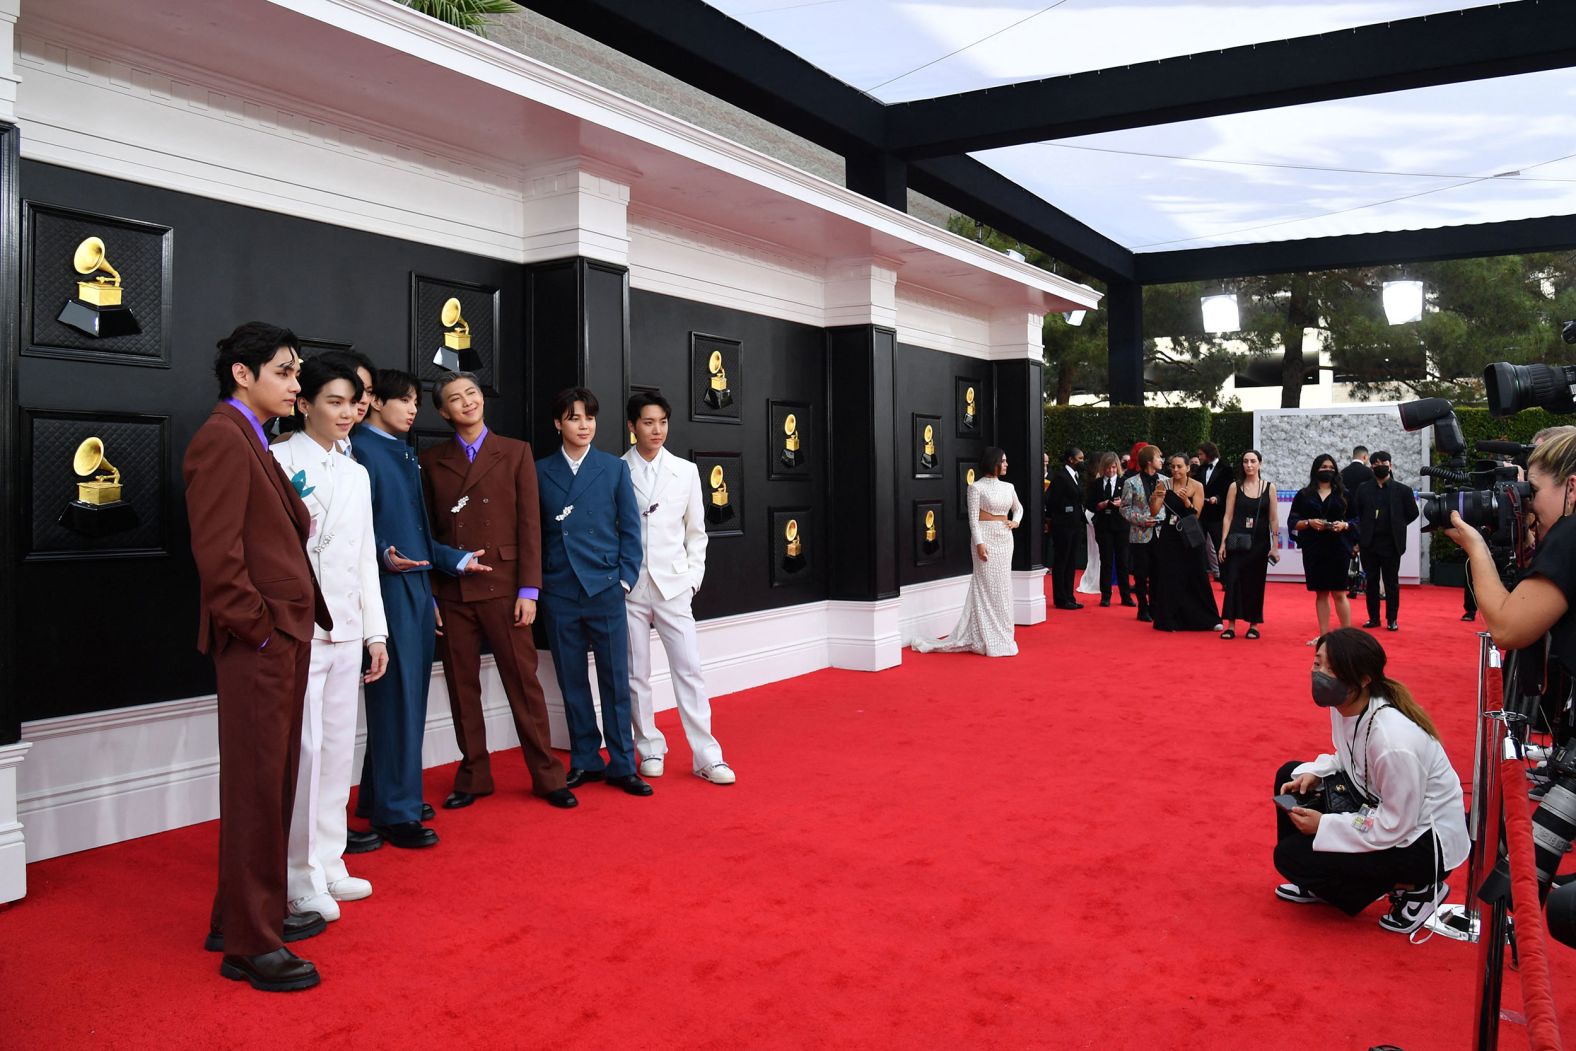 BTS poses on the red carpet before the show. <a href="index.php?page=&url=http%3A%2F%2Fwww.cnn.com%2Fstyle%2Farticle%2F2022-grammys-red-carpet-fashion%2Findex.html" target="_blank">See more red carpet photos.</a>